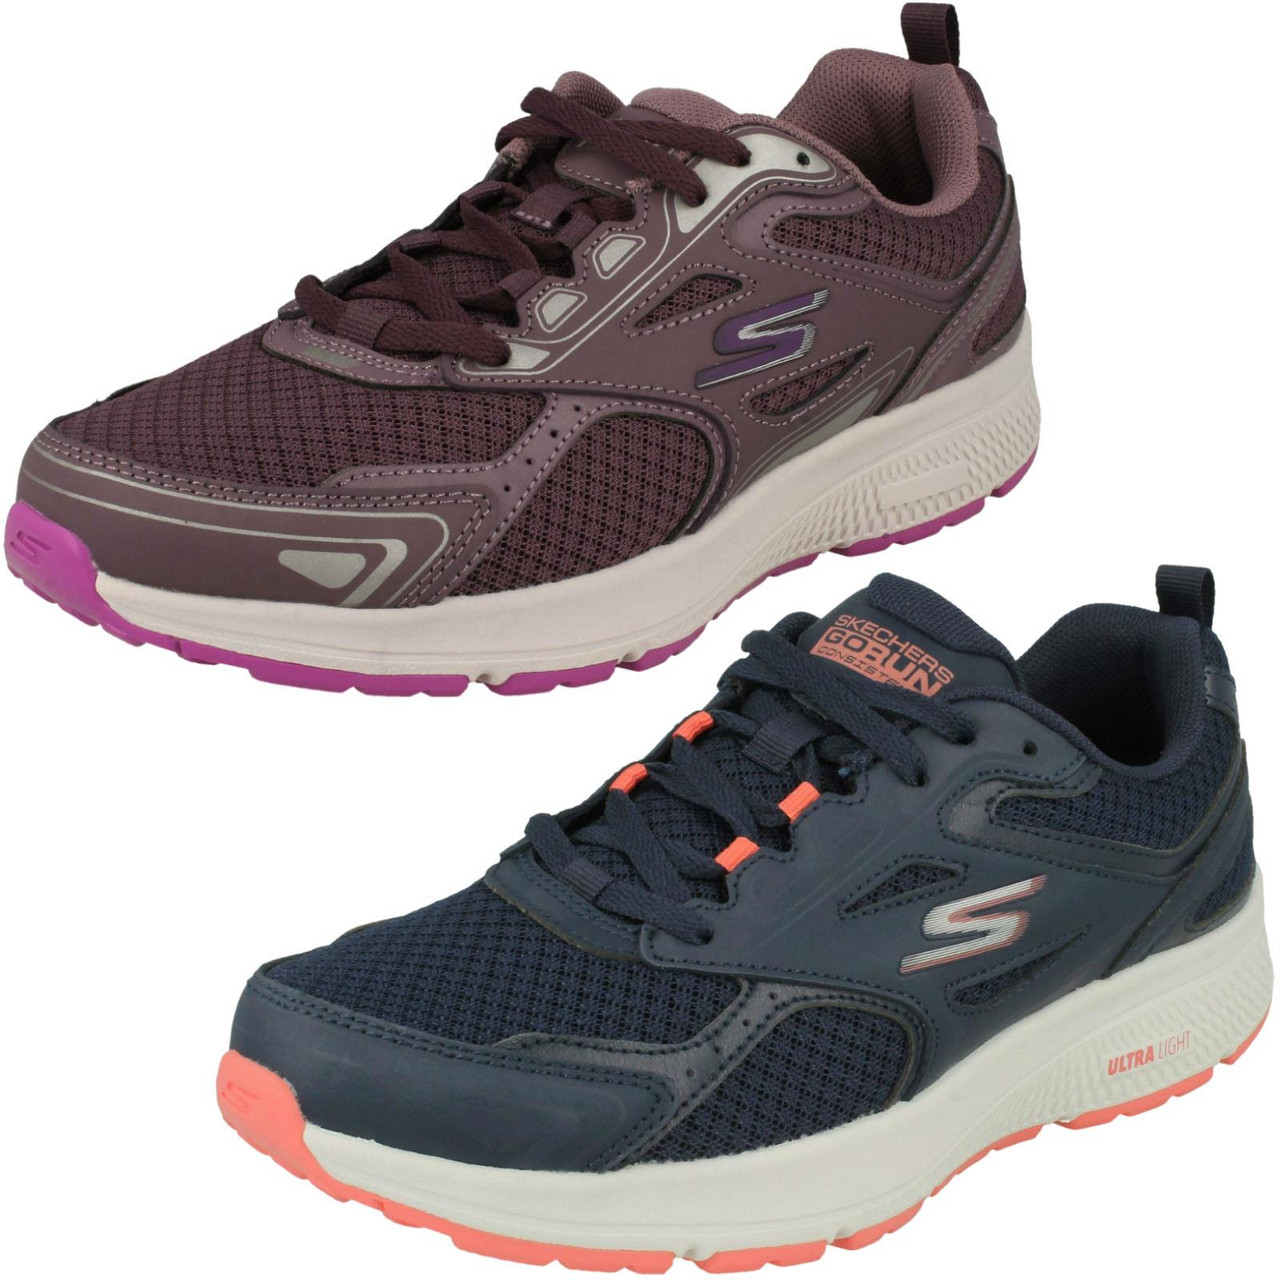 Ladies Skechers Cooled GOGA MAT Trainers Consistent